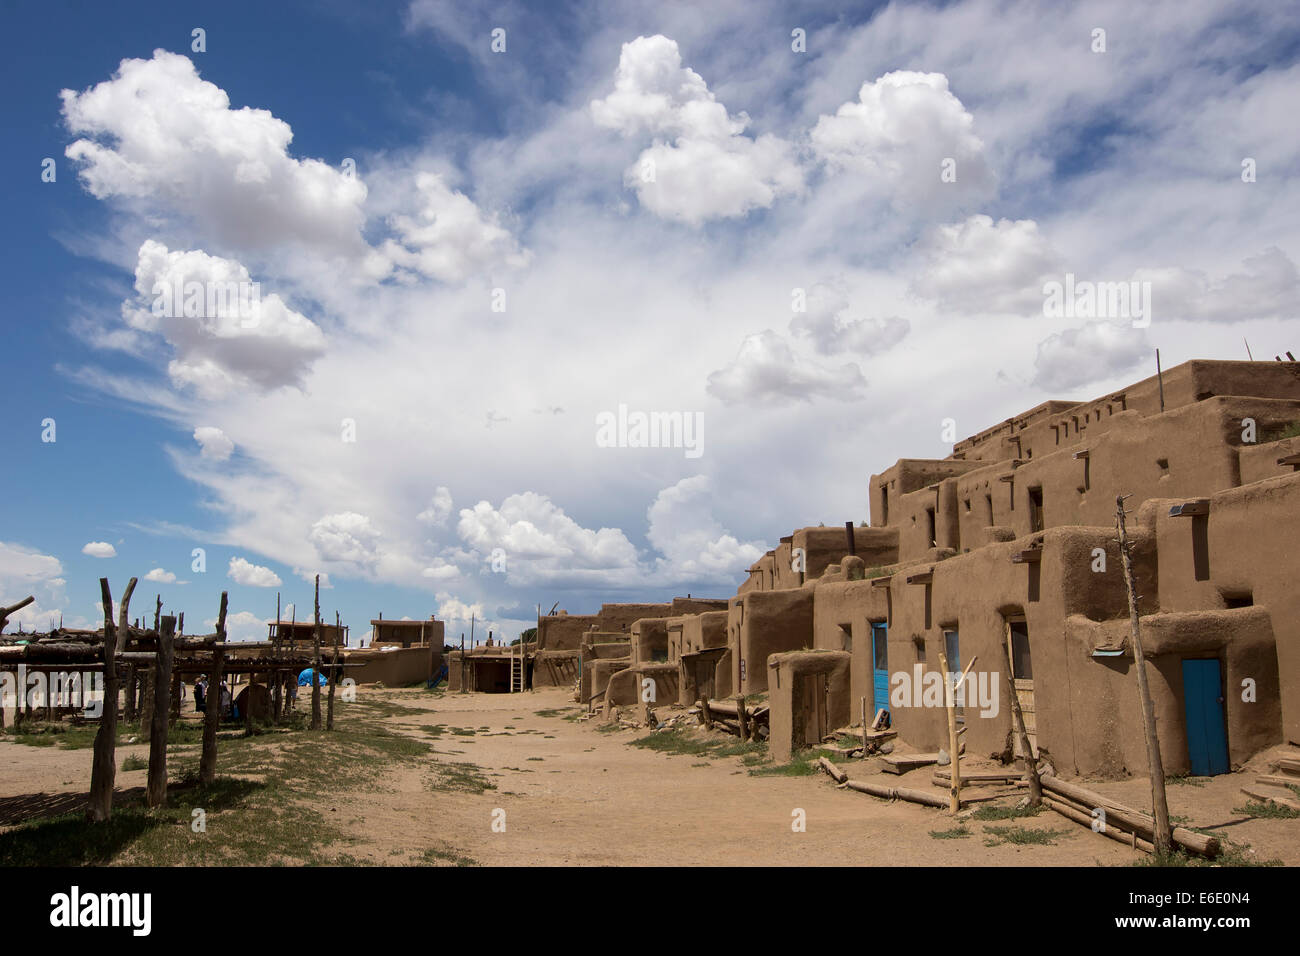 Taos Pueblo in northern New Mexico, a Native American community, National Historic Landmark and World Heritage Site. Stock Photo